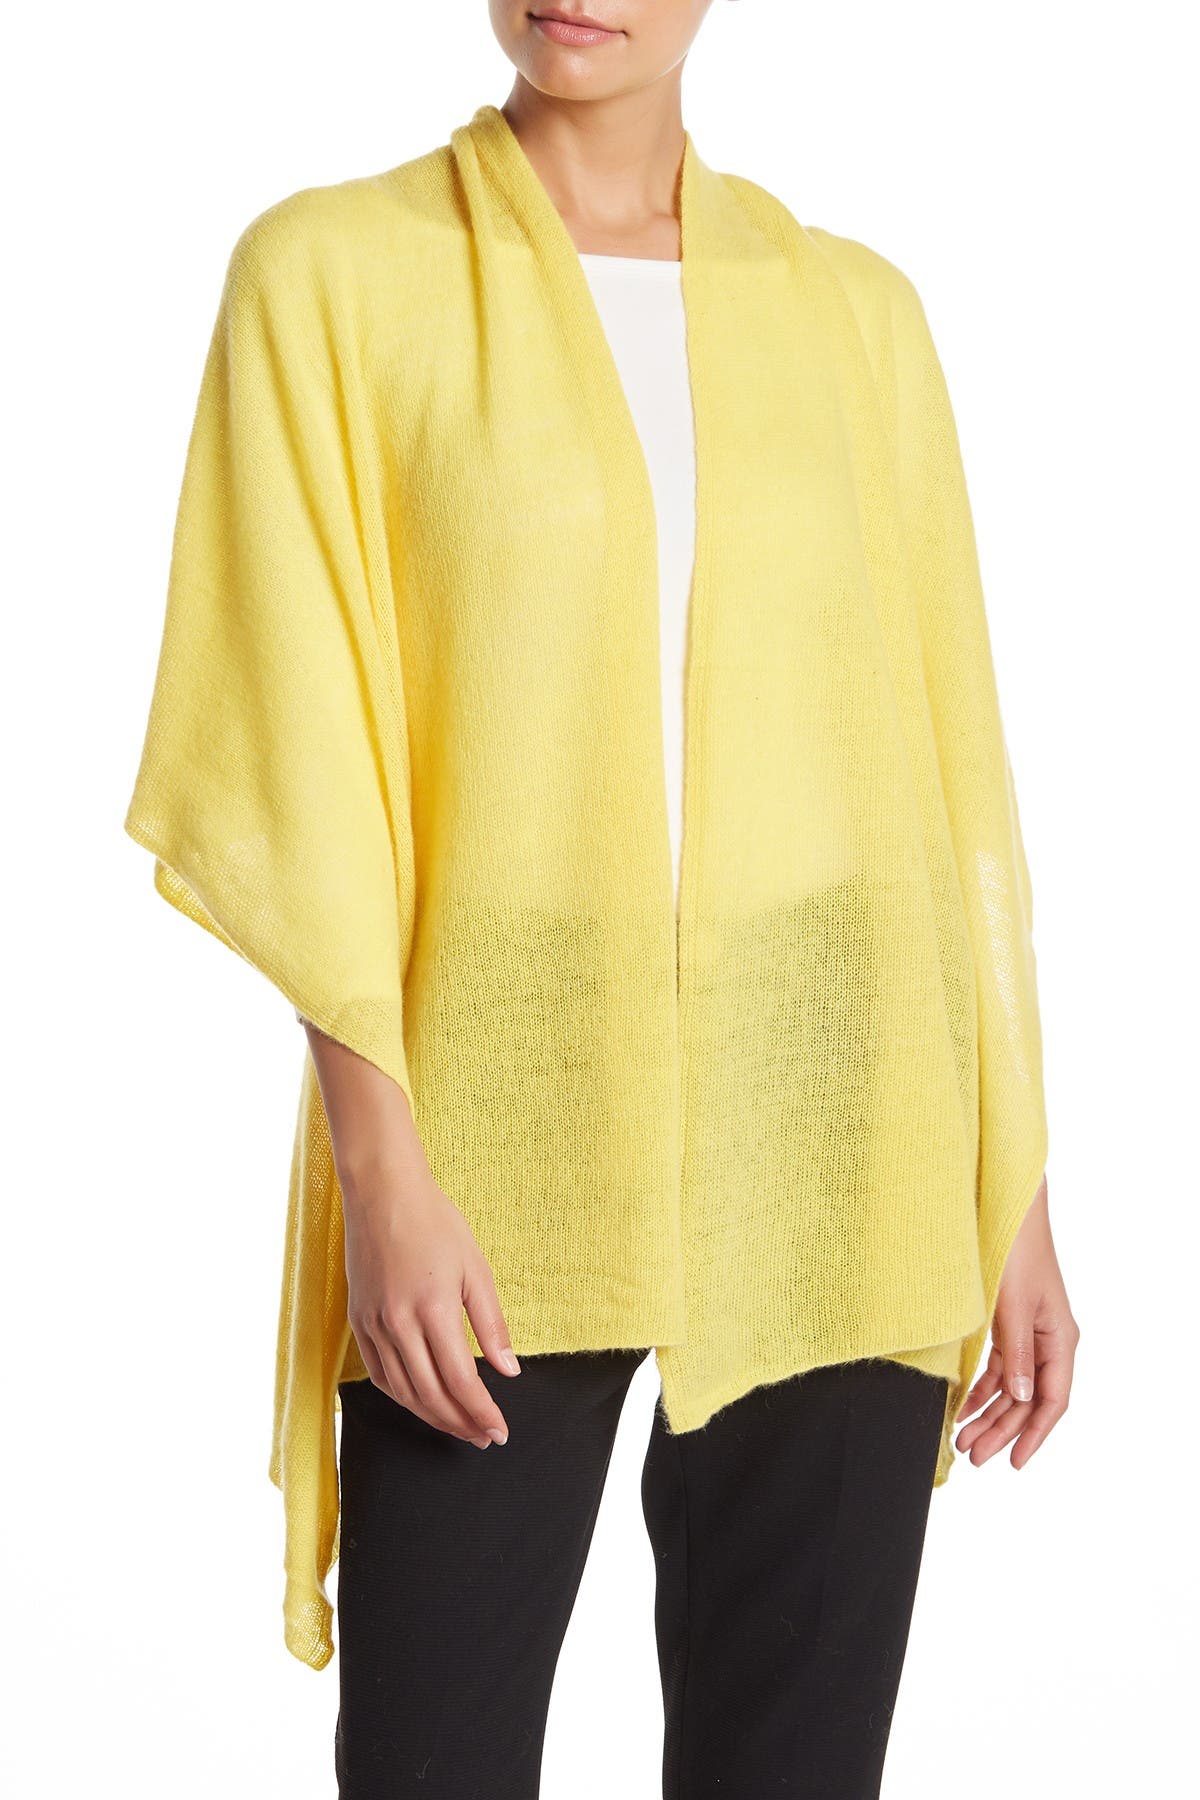 Portolano Lightweight Lambswool Blend Rolled Edge Wrap In Open Yellow12